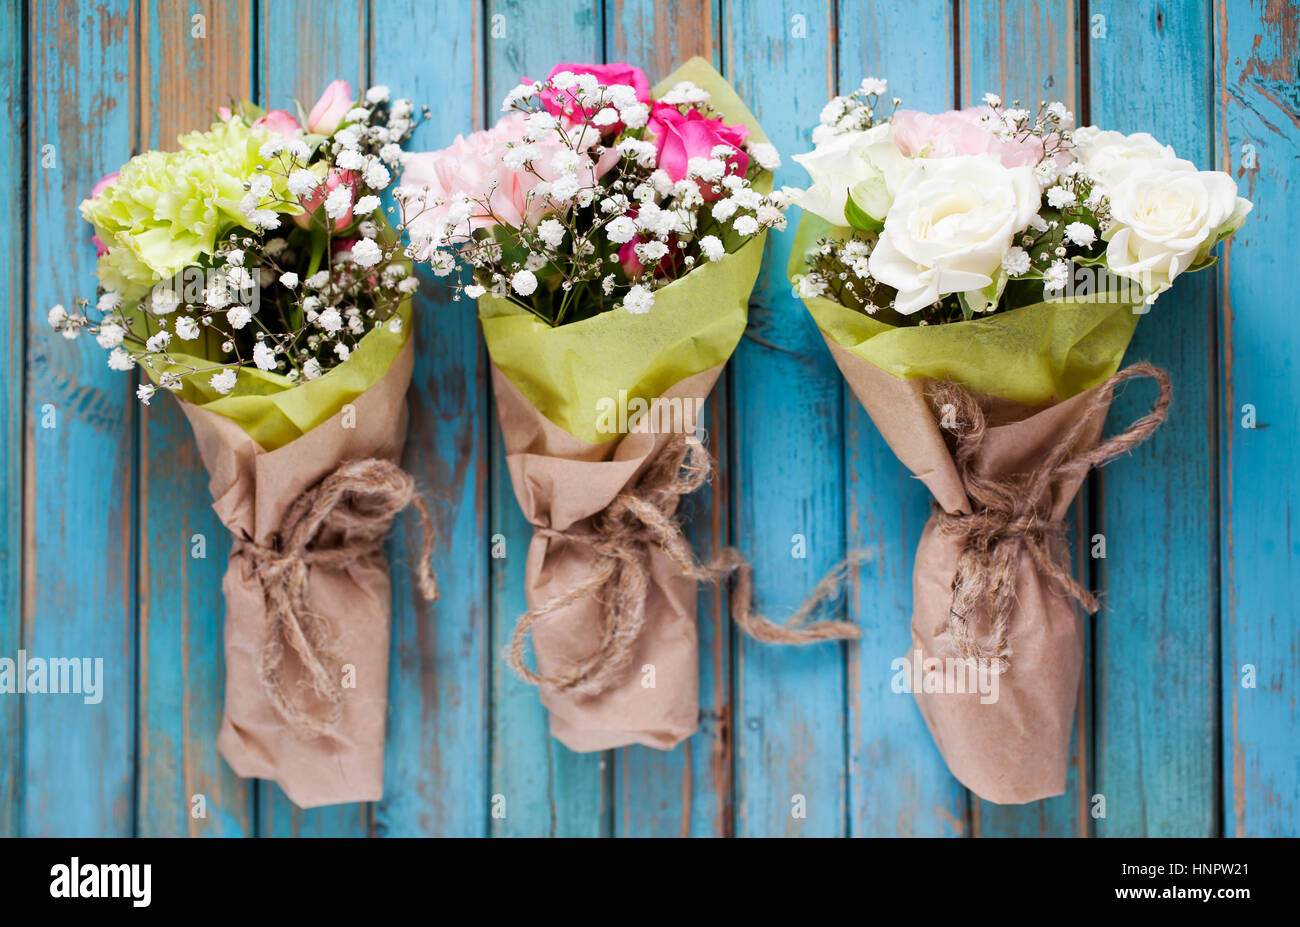 Mini flower bouquet with roses and carnation Stock Photo - Alamy